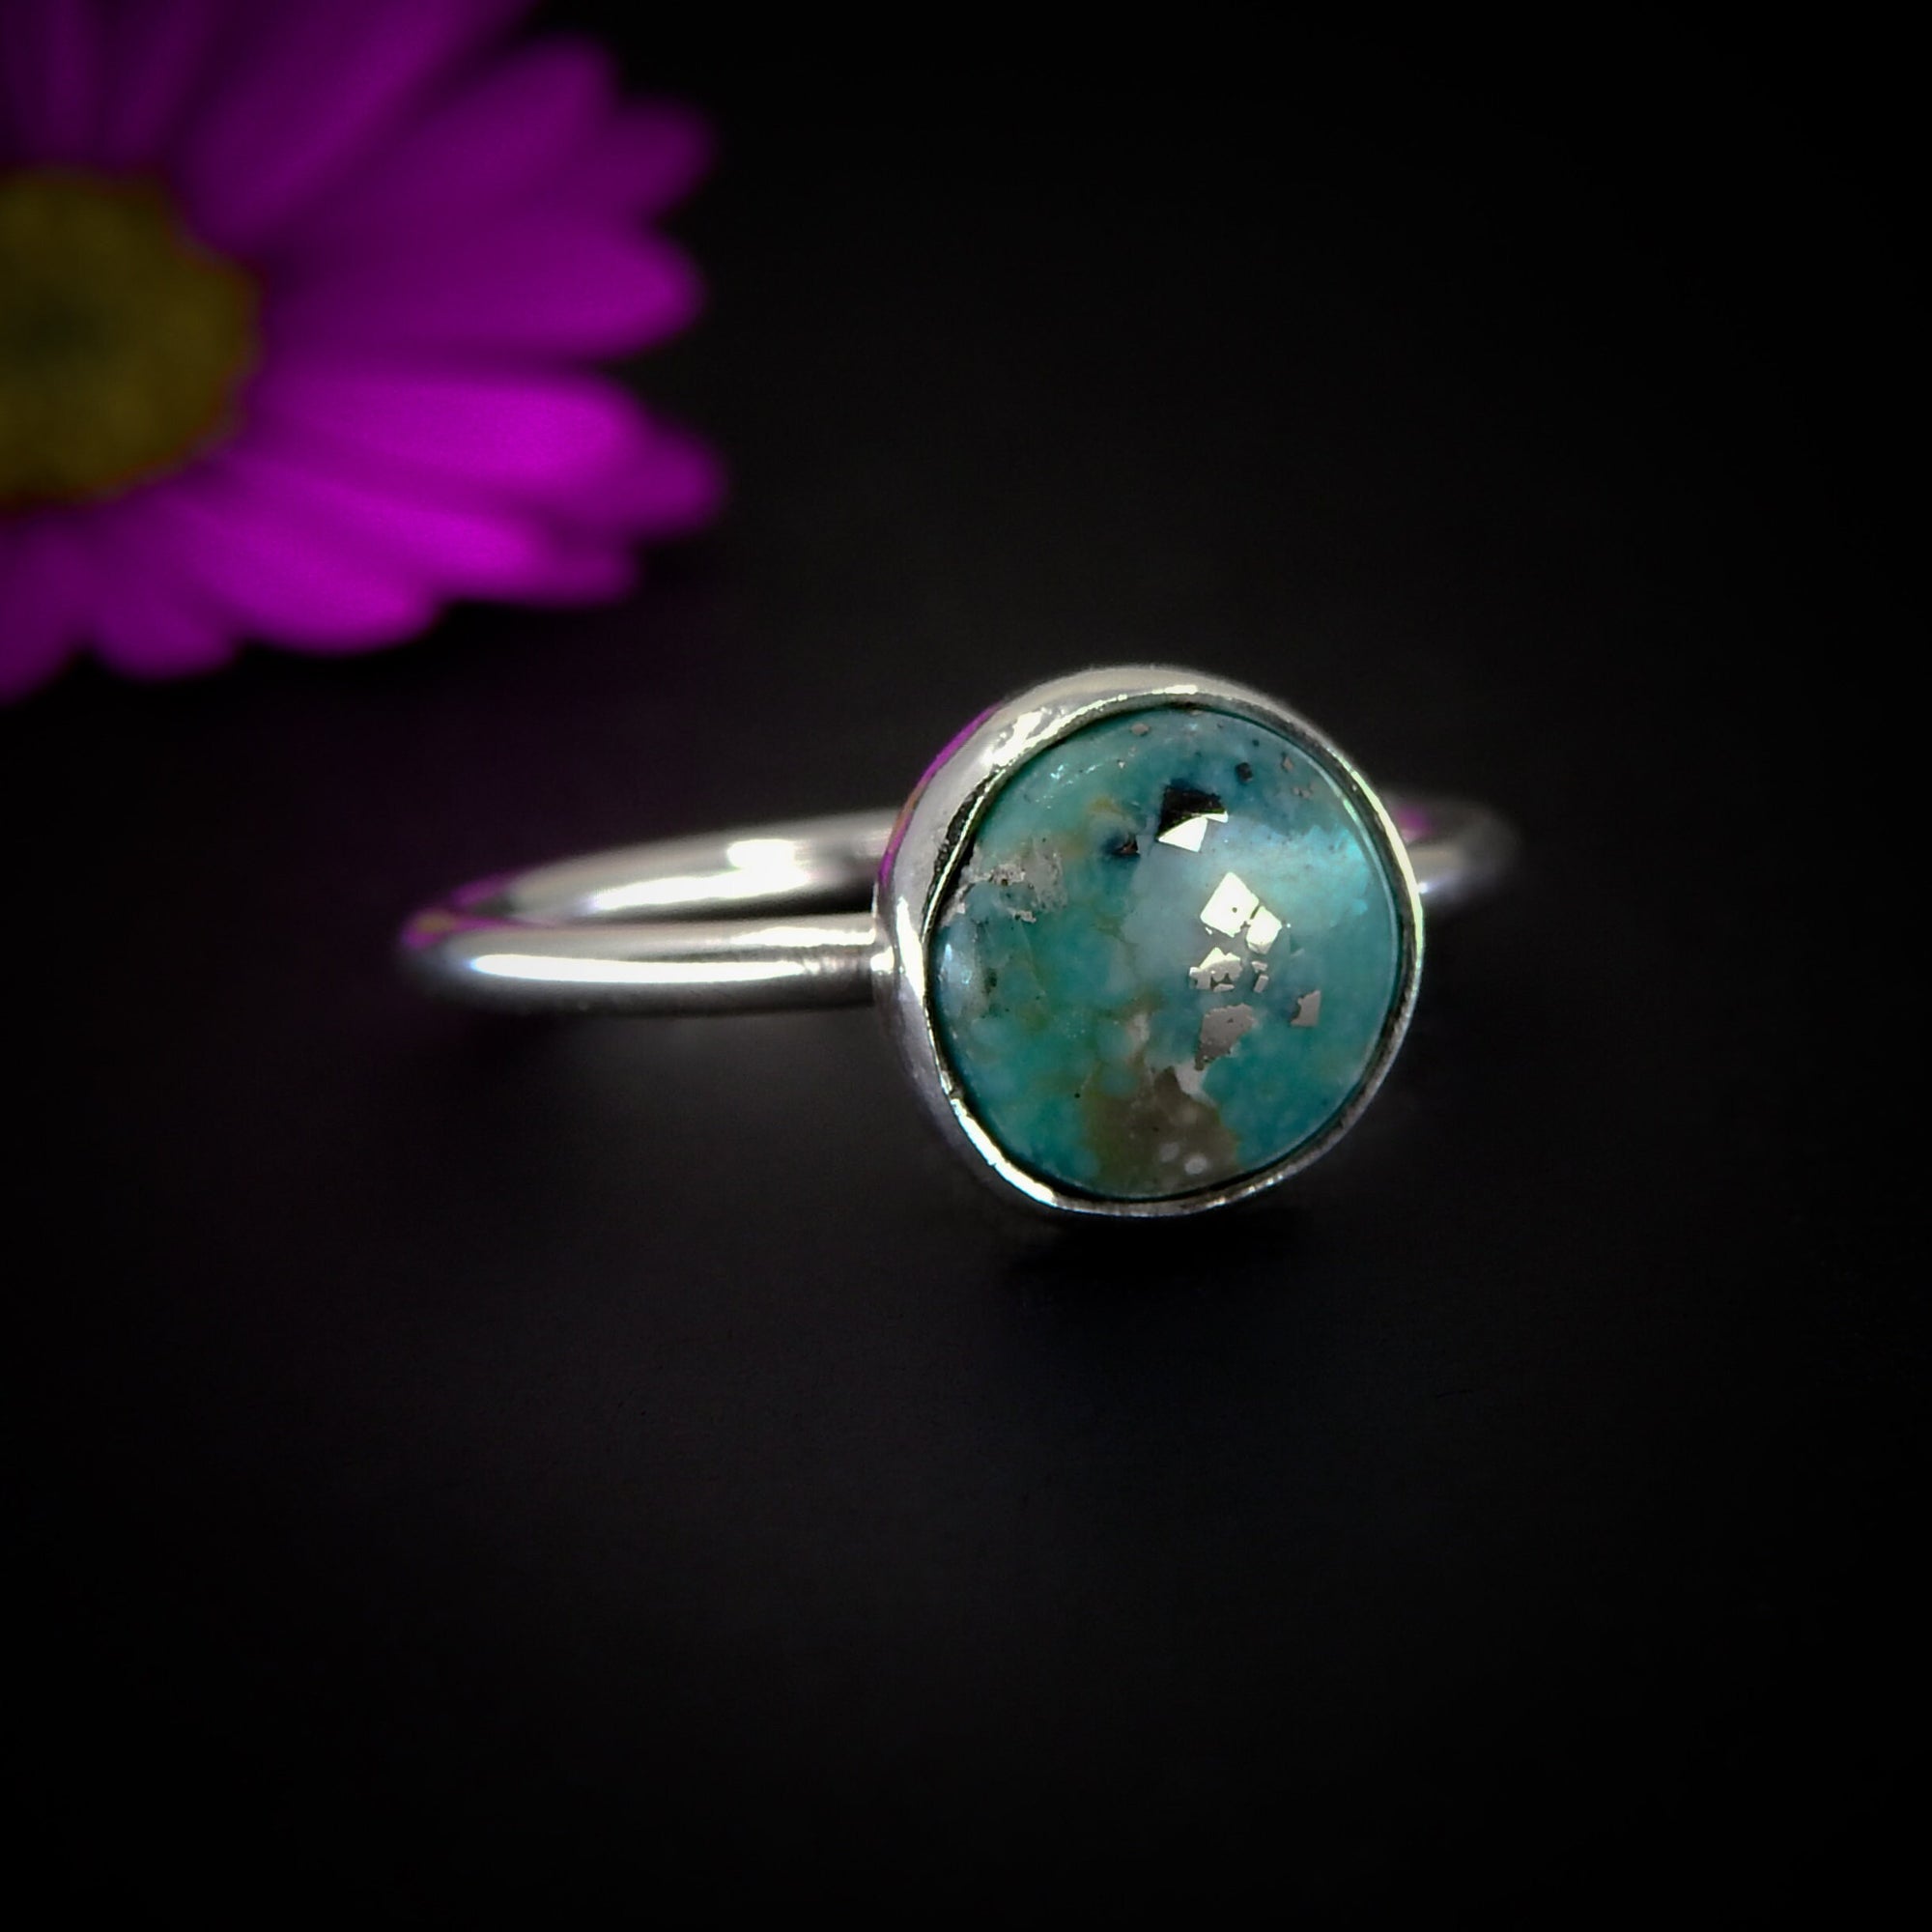 Nacozari Turquoise Ring - Size 6 - Sterling Silver - Teal Turquoise Jewellery - Rare Turquoise Jewelry - Dainty Unique Pyrite Turquoise Ring